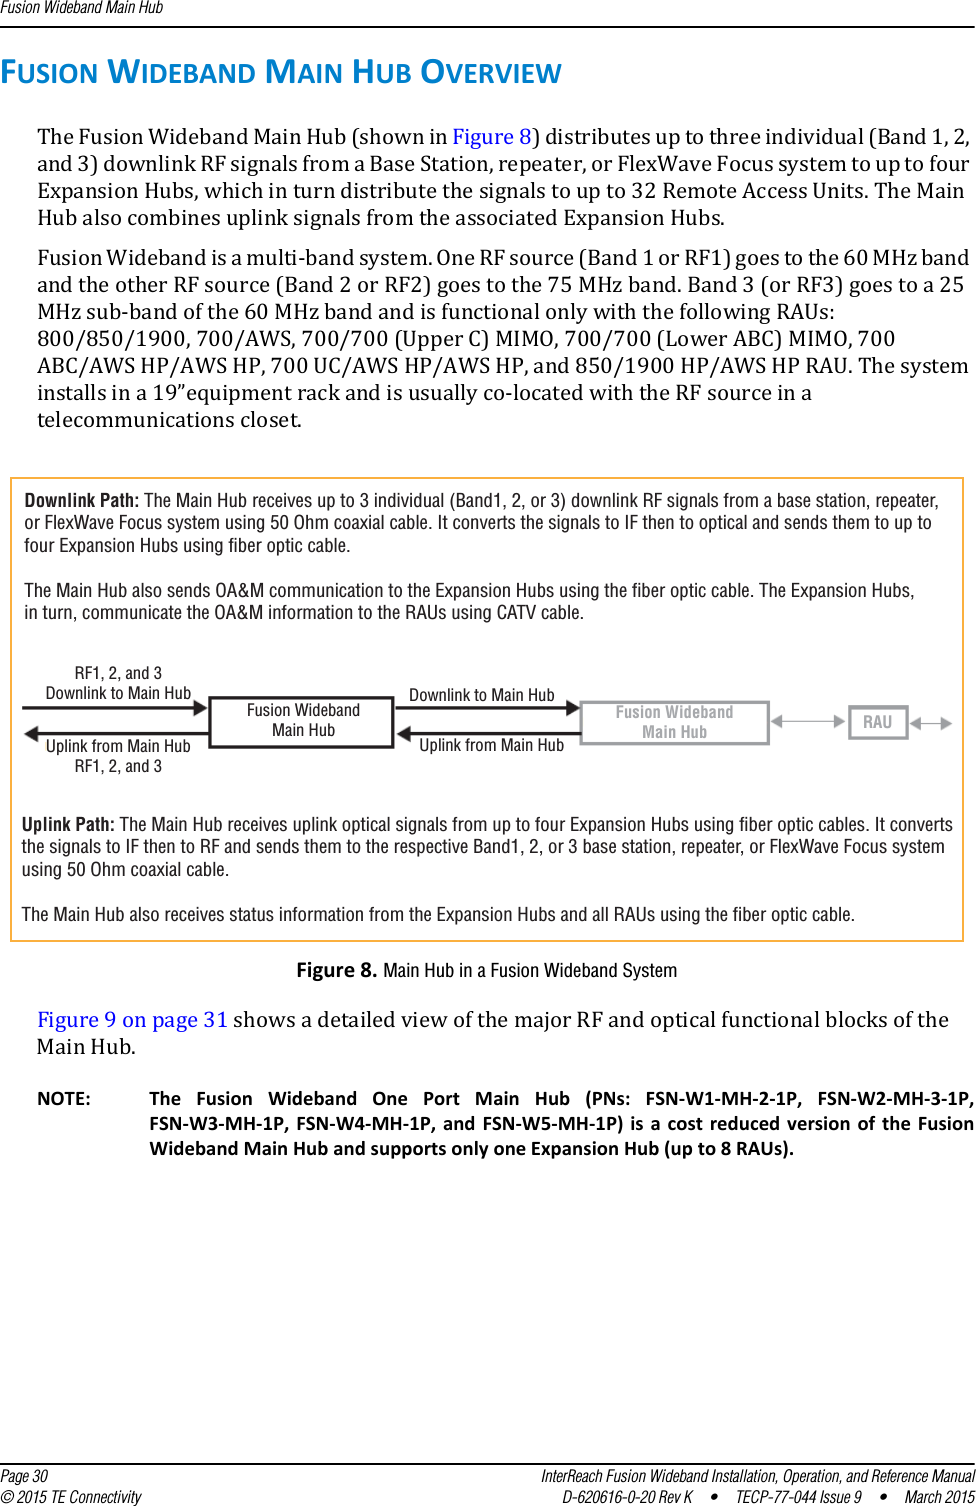 Fusion Wideband Main Hub  Page 30 InterReach Fusion Wideband Installation, Operation, and Reference Manual© 2015 TE Connectivity D-620616-0-20 Rev K  •  TECP-77-044 Issue 9  •  March 2015FUSION WIDEBAND MAIN HUB OVERVIEWThe Fusion Wideband Main Hub (shown in Figure 8) distributes up to three individual (Band 1, 2, and 3) downlink RF signals from a Base Station, repeater, or FlexWave Focus system to up to four Expansion Hubs, which in turn distribute the signals to up to 32 Remote Access Units. The Main Hub also combines uplink signals from the associated Expansion Hubs.Fusion Wideband is a multi-band system. One RF source (Band 1 or RF1) goes to the 60 MHz band and the other RF source (Band 2 or RF2) goes to the 75 MHz band. Band 3 (or RF3) goes to a 25 MHz sub-band of the 60 MHz band and is functional only with the following RAUs: 800/850/1900, 700/AWS, 700/700 (Upper C) MIMO, 700/700 (Lower ABC) MIMO, 700 ABC/AWS HP/AWS HP, 700 UC/AWS HP/AWS HP, and 850/1900 HP/AWS HP RAU. The system installs in a 19”equipment rack and is usually co-located with the RF source in a telecommunications closet.Figure 8. Main Hub in a Fusion Wideband SystemFigure 9 on page 31 shows a detailed view of the major RF and optical functional blocks of the Main Hub.NOTE: The Fusion Wideband One Port Main Hub (PNs: FSN-W1-MH-2-1P, FSN-W2-MH-3-1P, FSN-W3-MH-1P, FSN-W4-MH-1P, and FSN-W5-MH-1P) is a cost reduced version of the Fusion Wideband Main Hub and supports only one Expansion Hub (up to 8 RAUs).Downlink Path: The Main Hub receives up to 3 individual (Band1, 2, or 3) downlink RF signals from a base station, repeater, or FlexWave Focus system using 50 Ohm coaxial cable. It converts the signals to IF then to optical and sends them to up to four Expansion Hubs using fiber optic cable.The Main Hub also sends OA&amp;M communication to the Expansion Hubs using the fiber optic cable. The Expansion Hubs, in turn, communicate the OA&amp;M information to the RAUs using CATV cable.Uplink Path: The Main Hub receives uplink optical signals from up to four Expansion Hubs using fiber optic cables. It converts the signals to IF then to RF and sends them to the respective Band1, 2, or 3 base station, repeater, or FlexWave Focus system using 50 Ohm coaxial cable.The Main Hub also receives status information from the Expansion Hubs and all RAUs using the fiber optic cable.RF1, 2, and 3Downlink to Main HubUplink from Main HubRF1, 2, and 3Downlink to Main HubUplink from Main HubFusion WidebandMain HubFusion WidebandMain Hub RAU